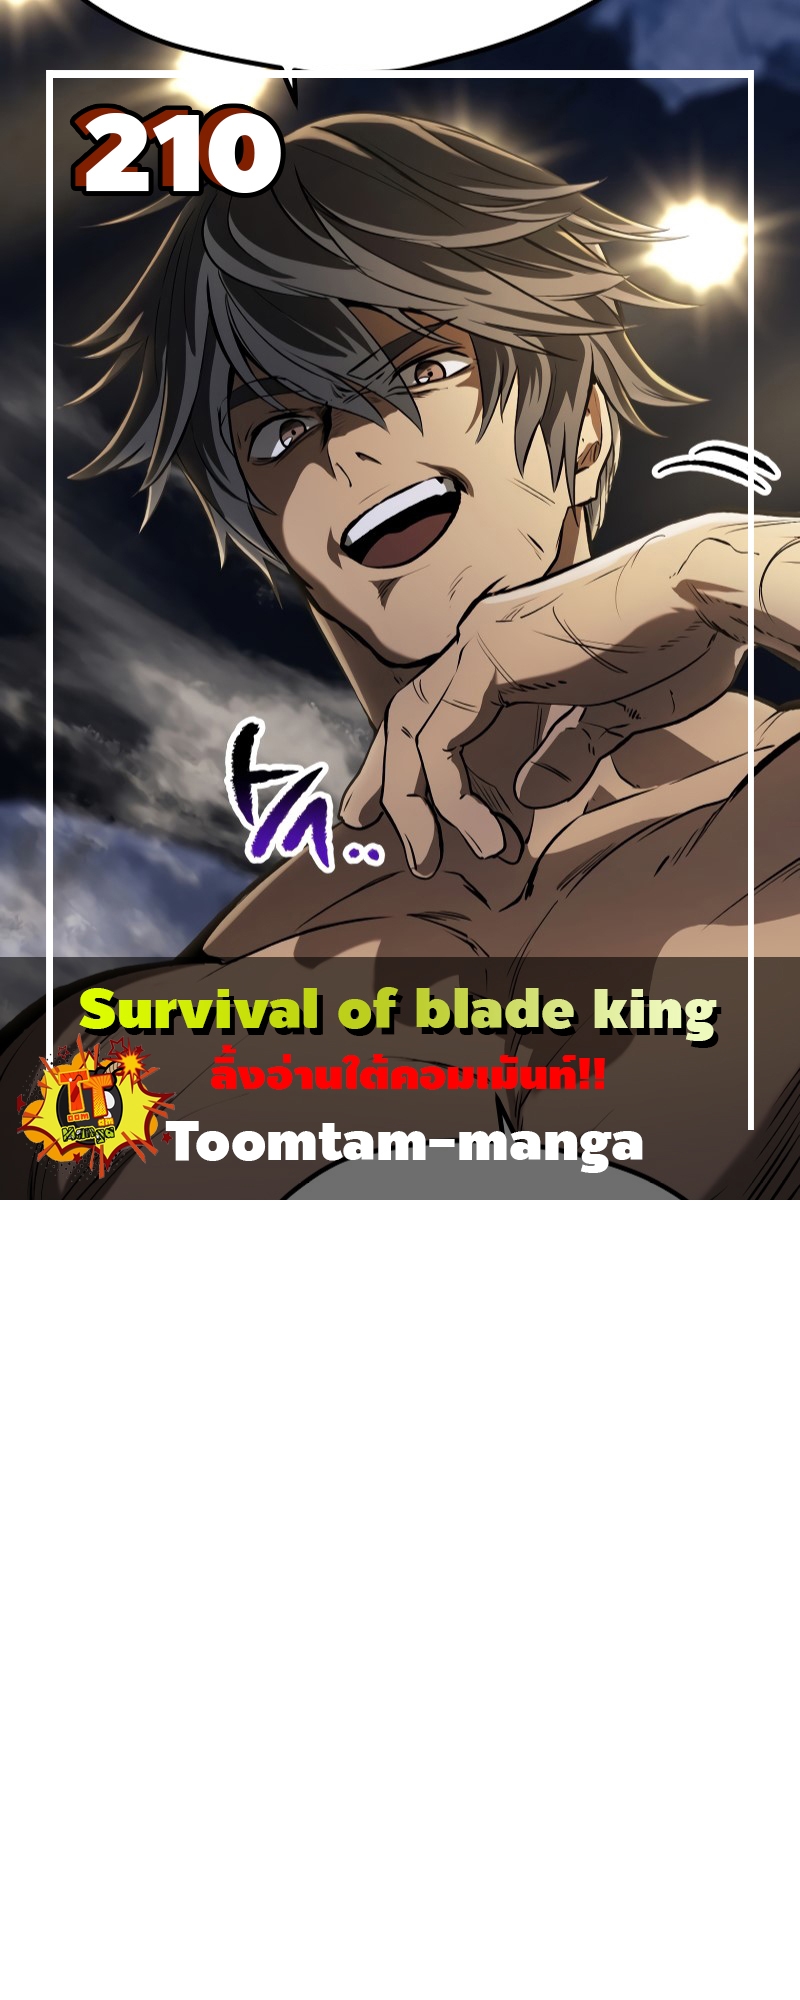 Survival of blade king 210 15 06 25670001